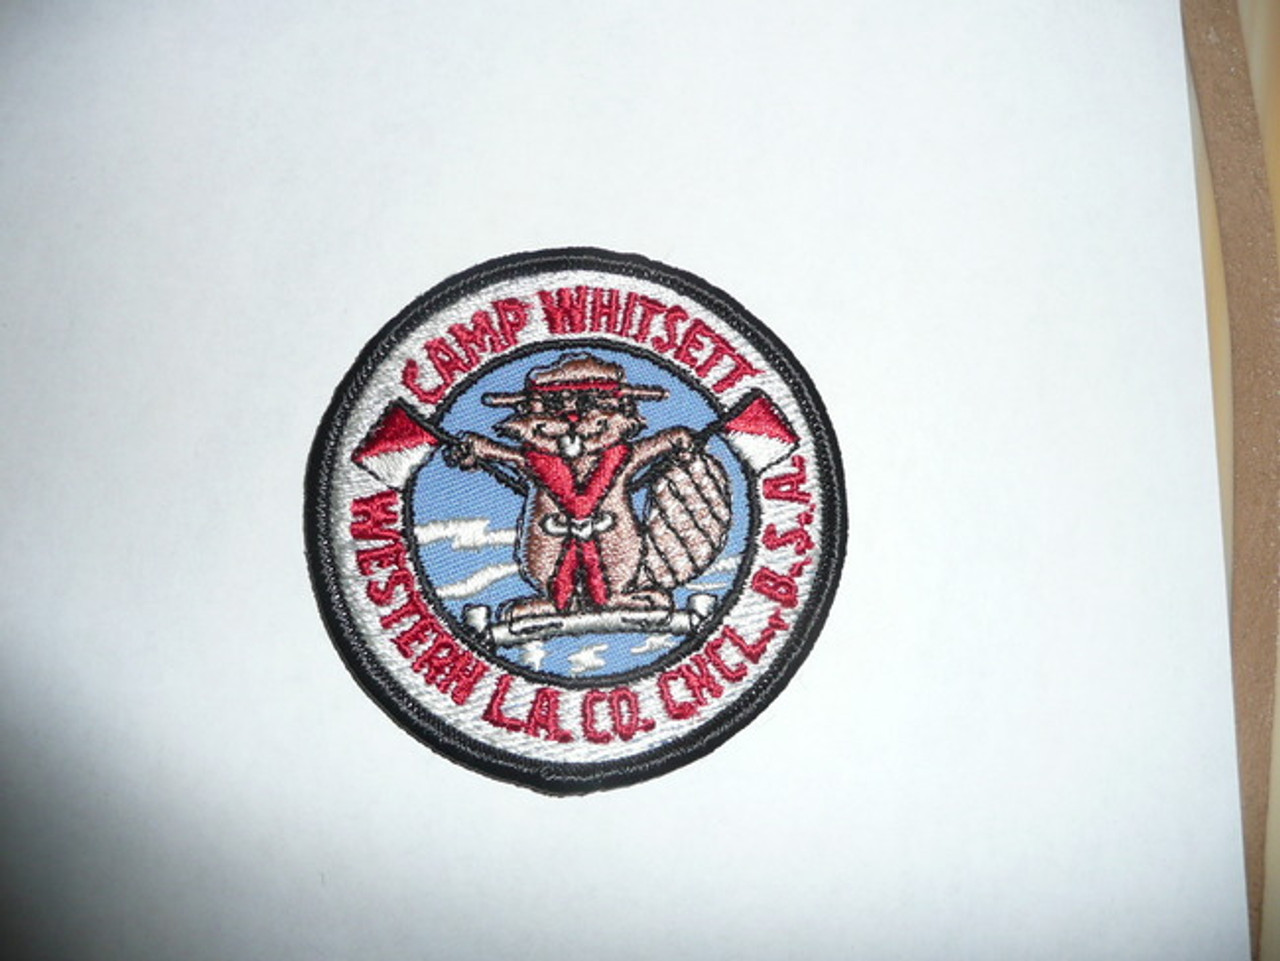 1987 Camp Whitsett Patch - Scout